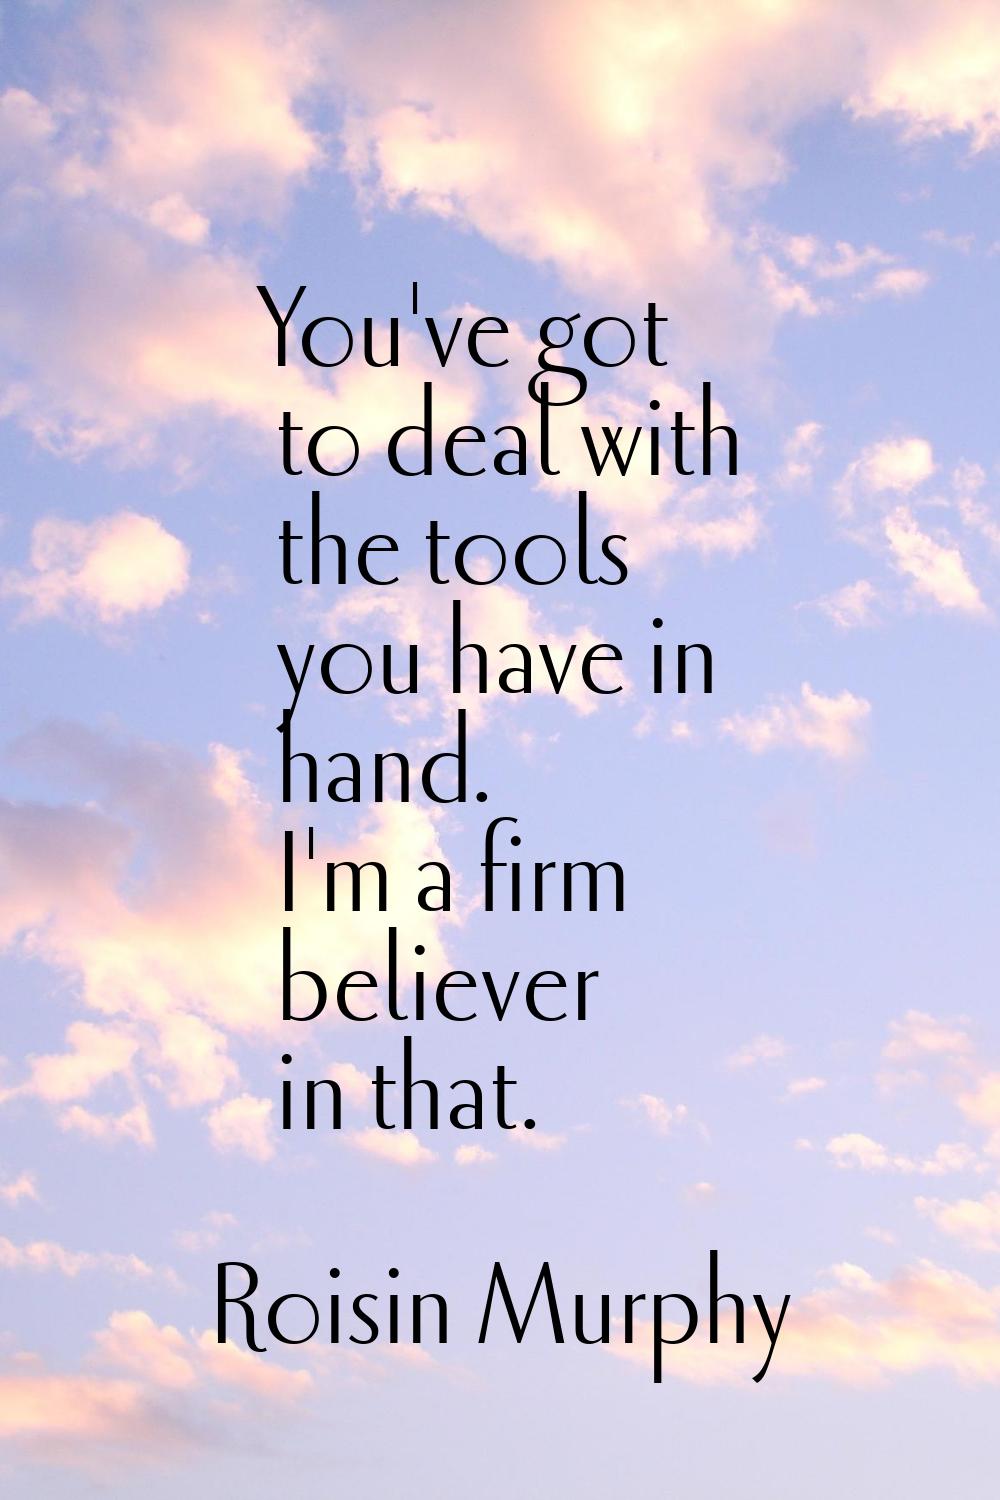 You've got to deal with the tools you have in hand. I'm a firm believer in that.